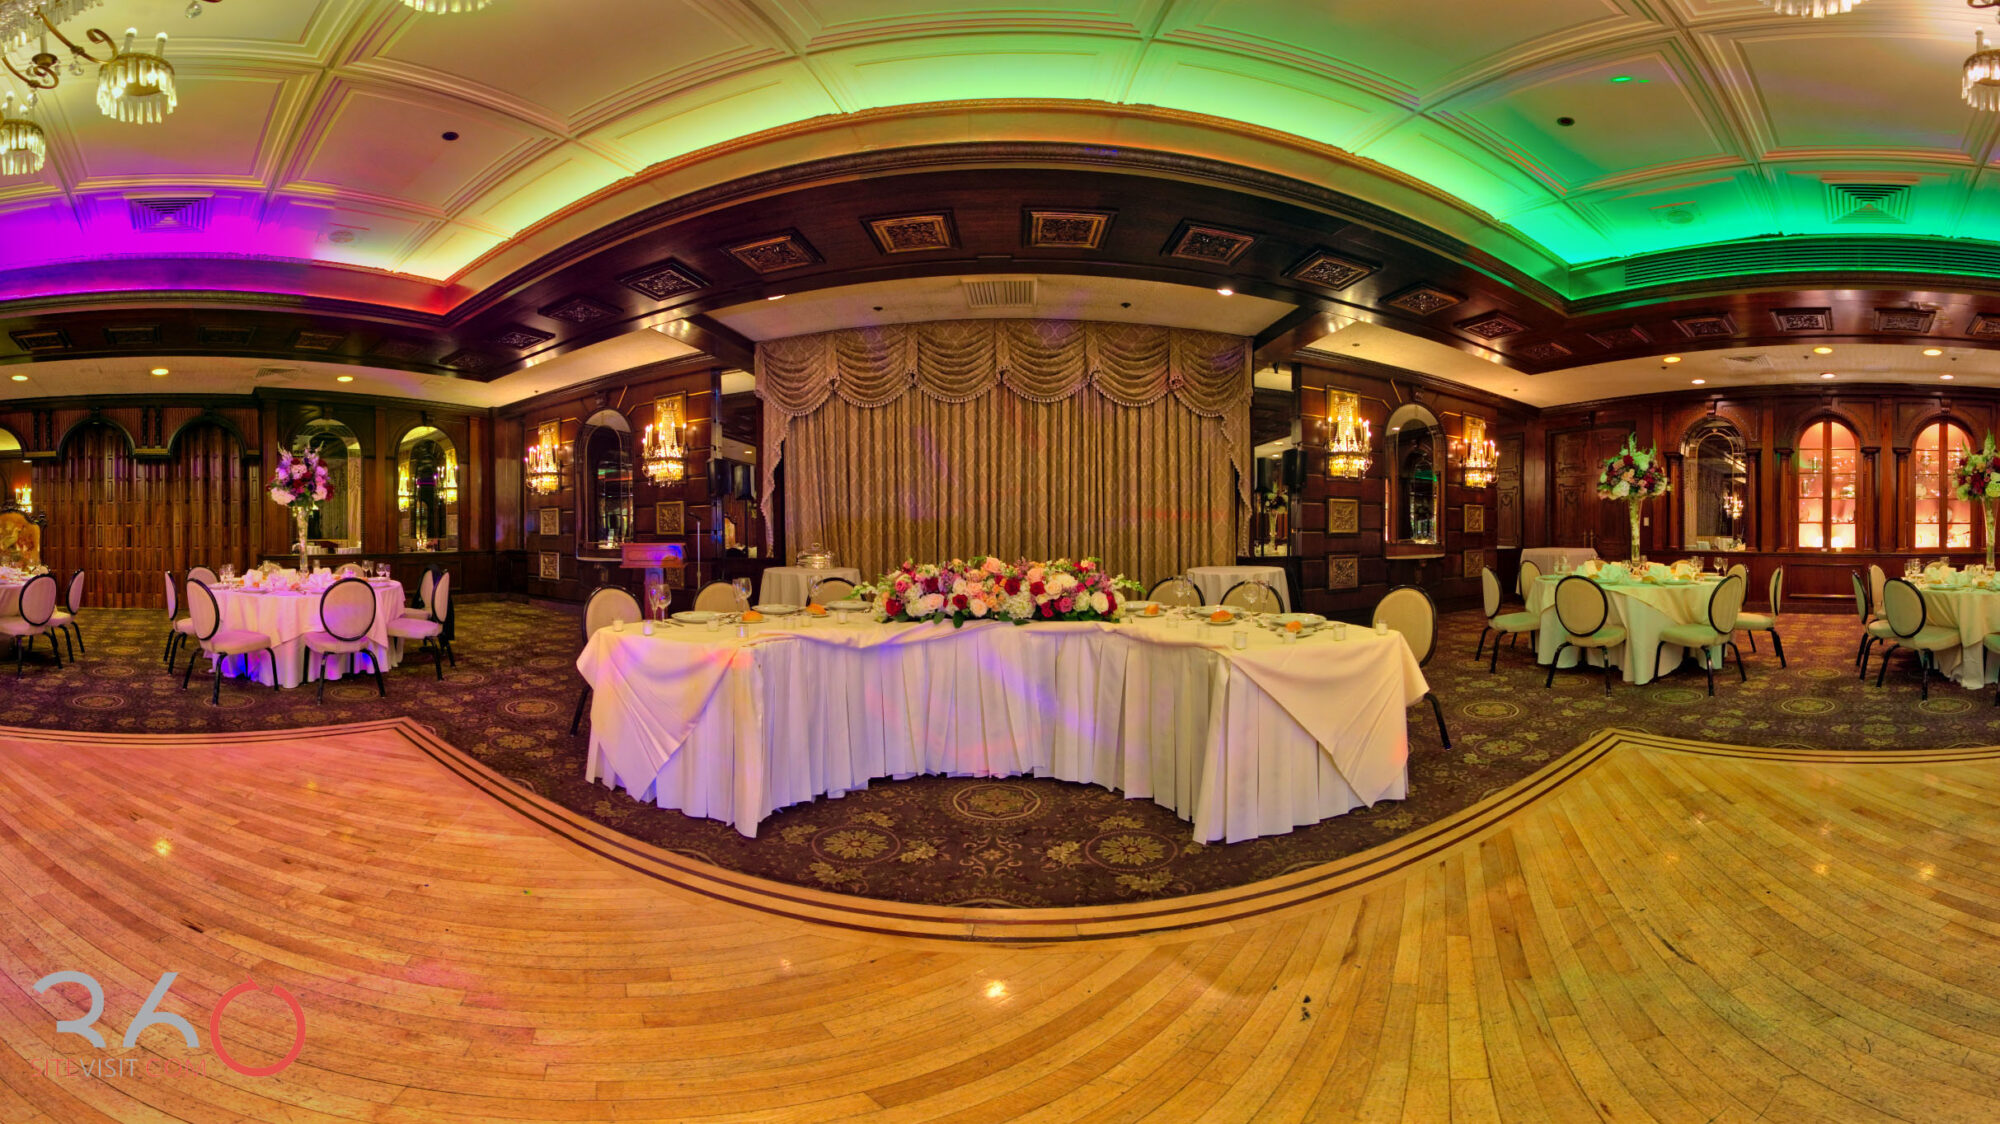 58-The Manor New Jersey wedding venue virtual tour by 360sitevisit